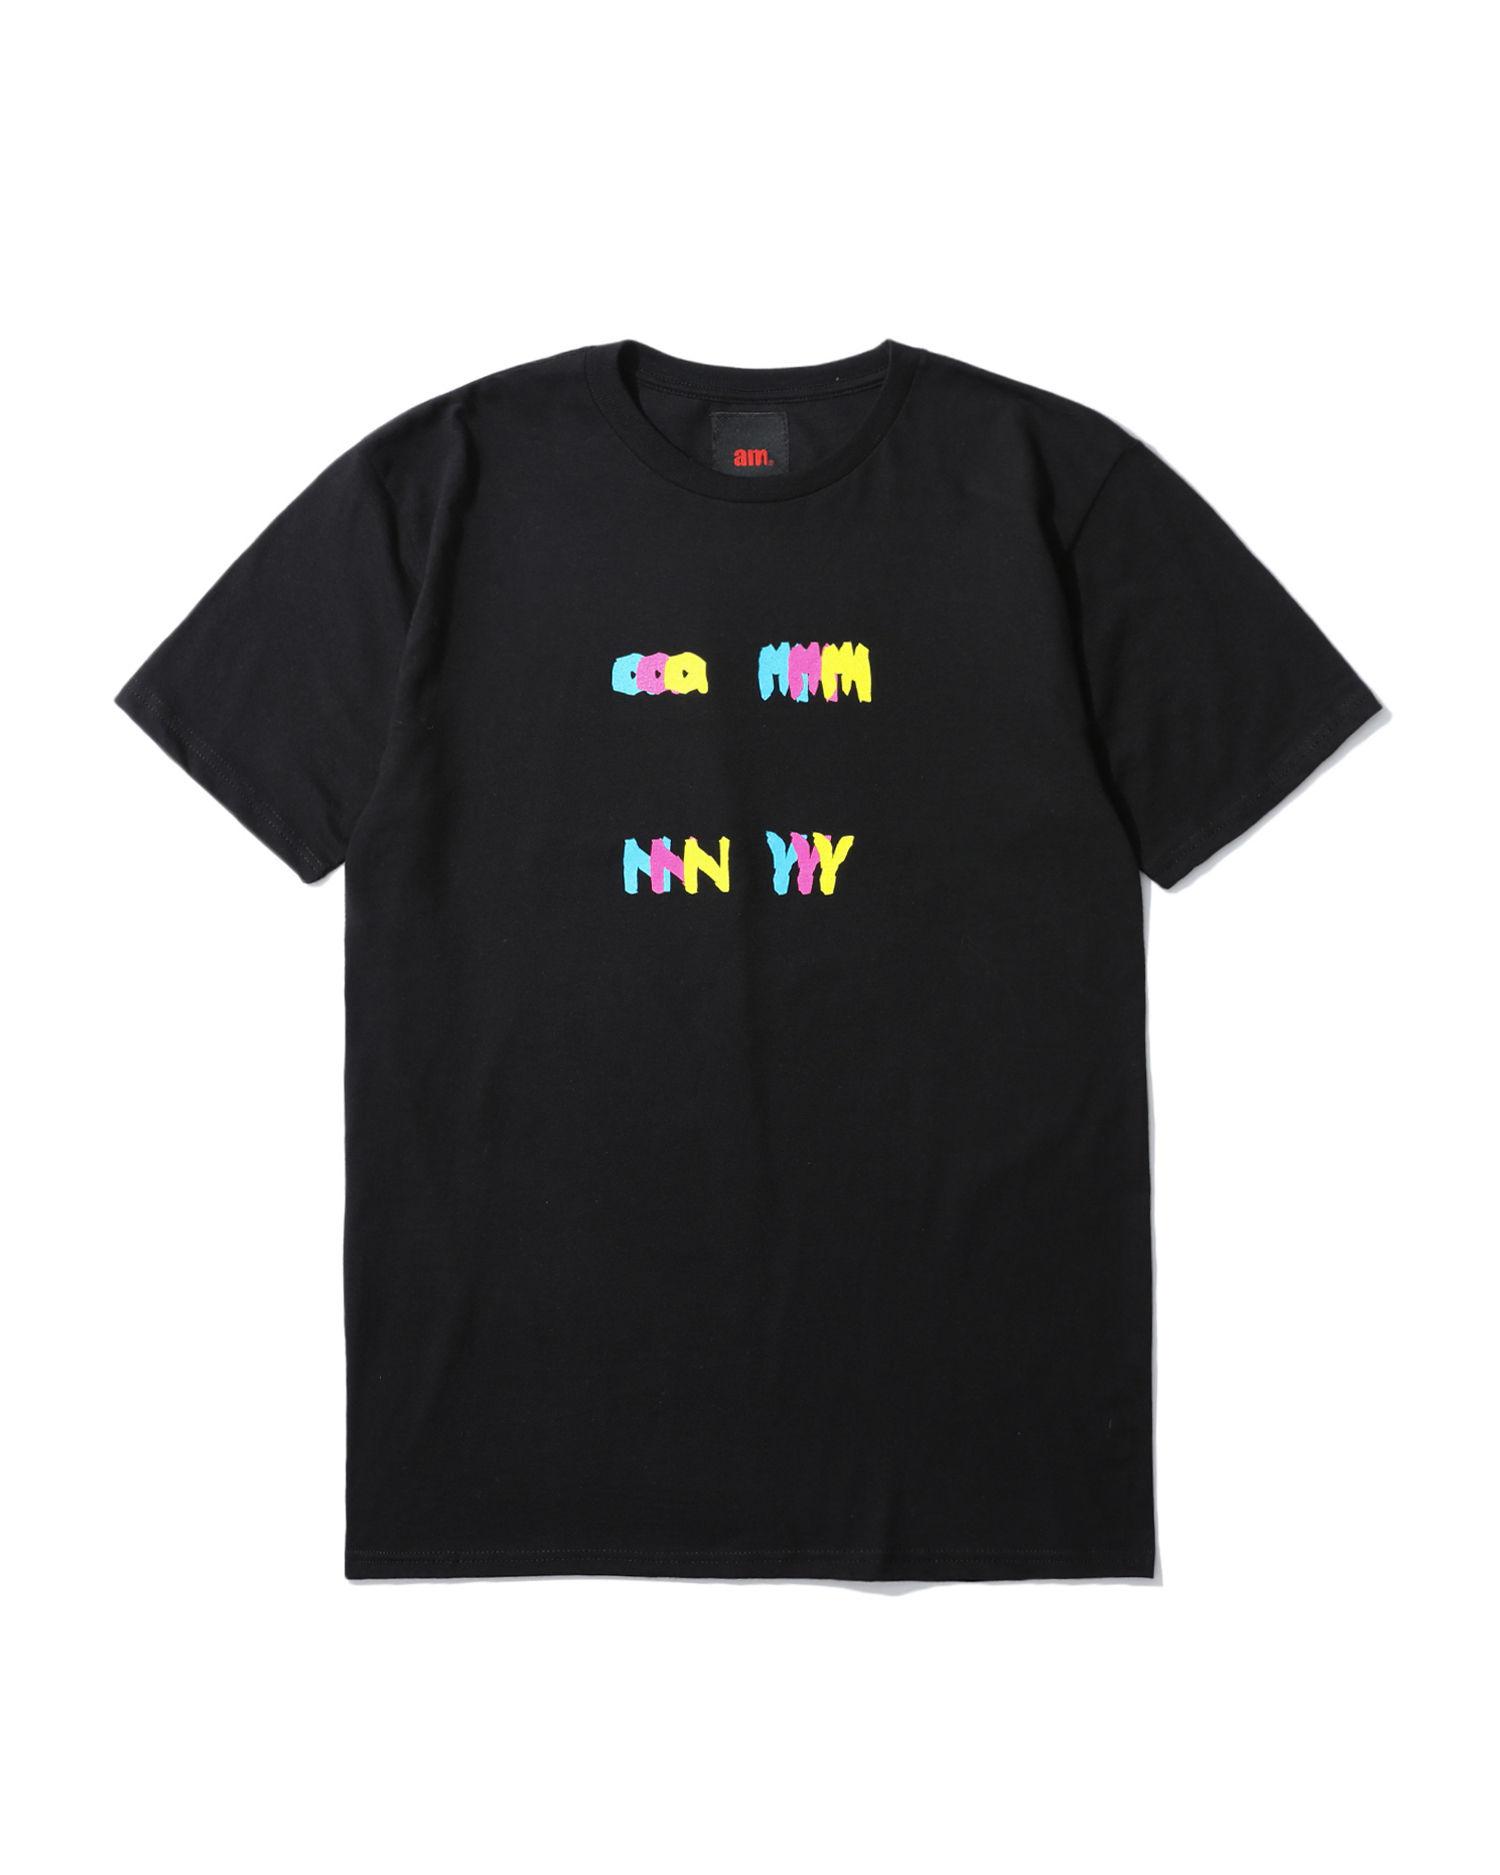 No Signal tee by AFTER MIDNIGHT